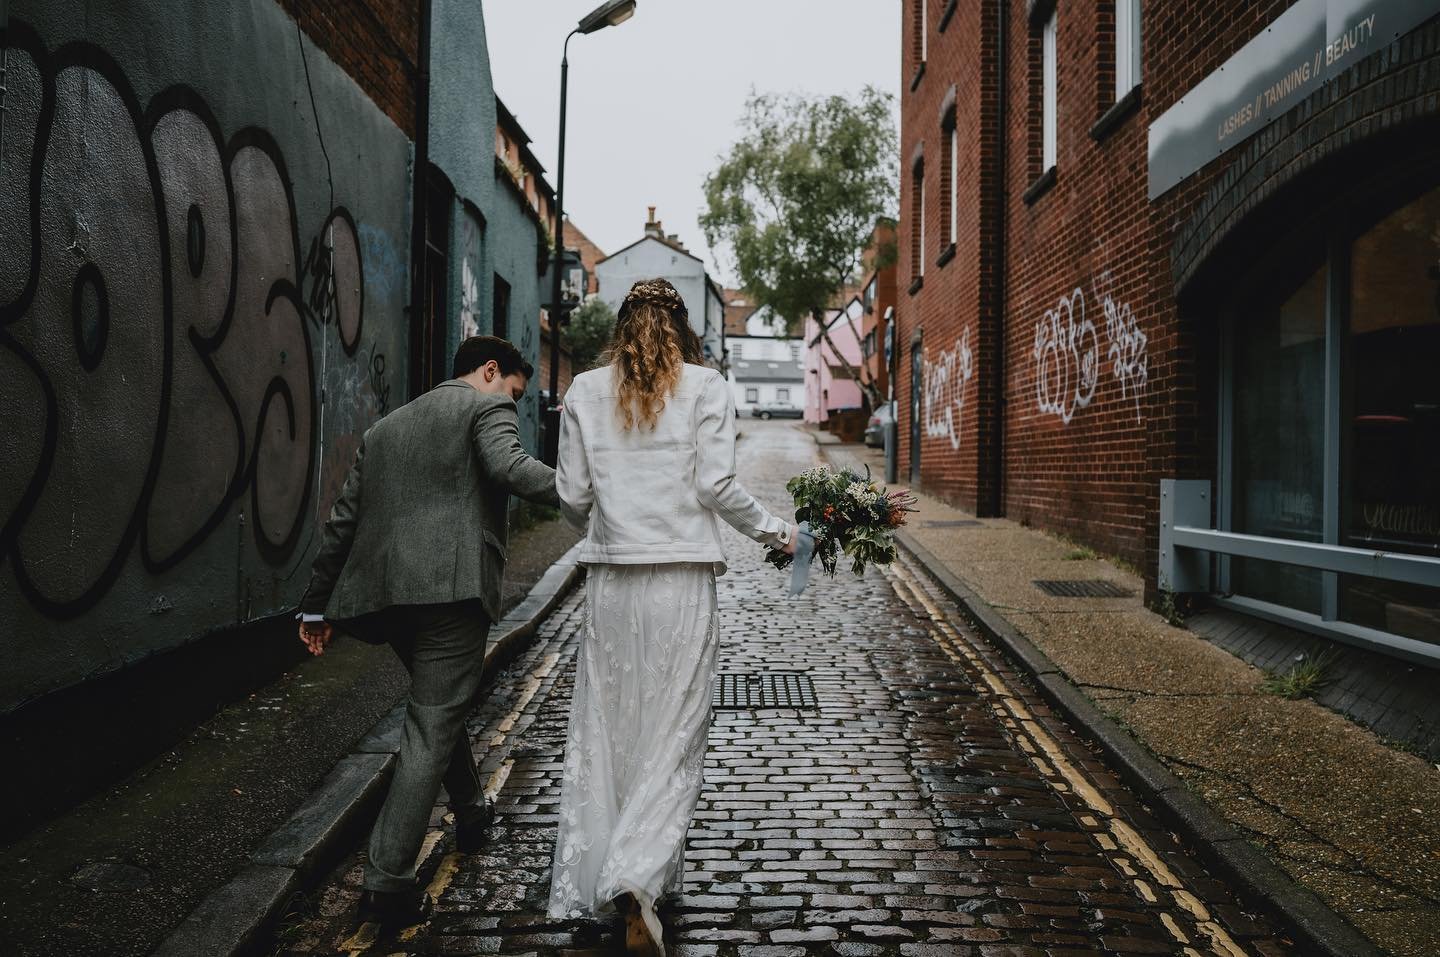 Just one of those weddings that make me fall in love with Norwich even more! Anna and Magne, your day was amazing! 

Venue @nacweddings @norwichartscentre 
Florist @trianglenursery 
Dress @monsoon 
Suit @mossbros 
Makeup @muirmua 
Hair @invidia_norwi